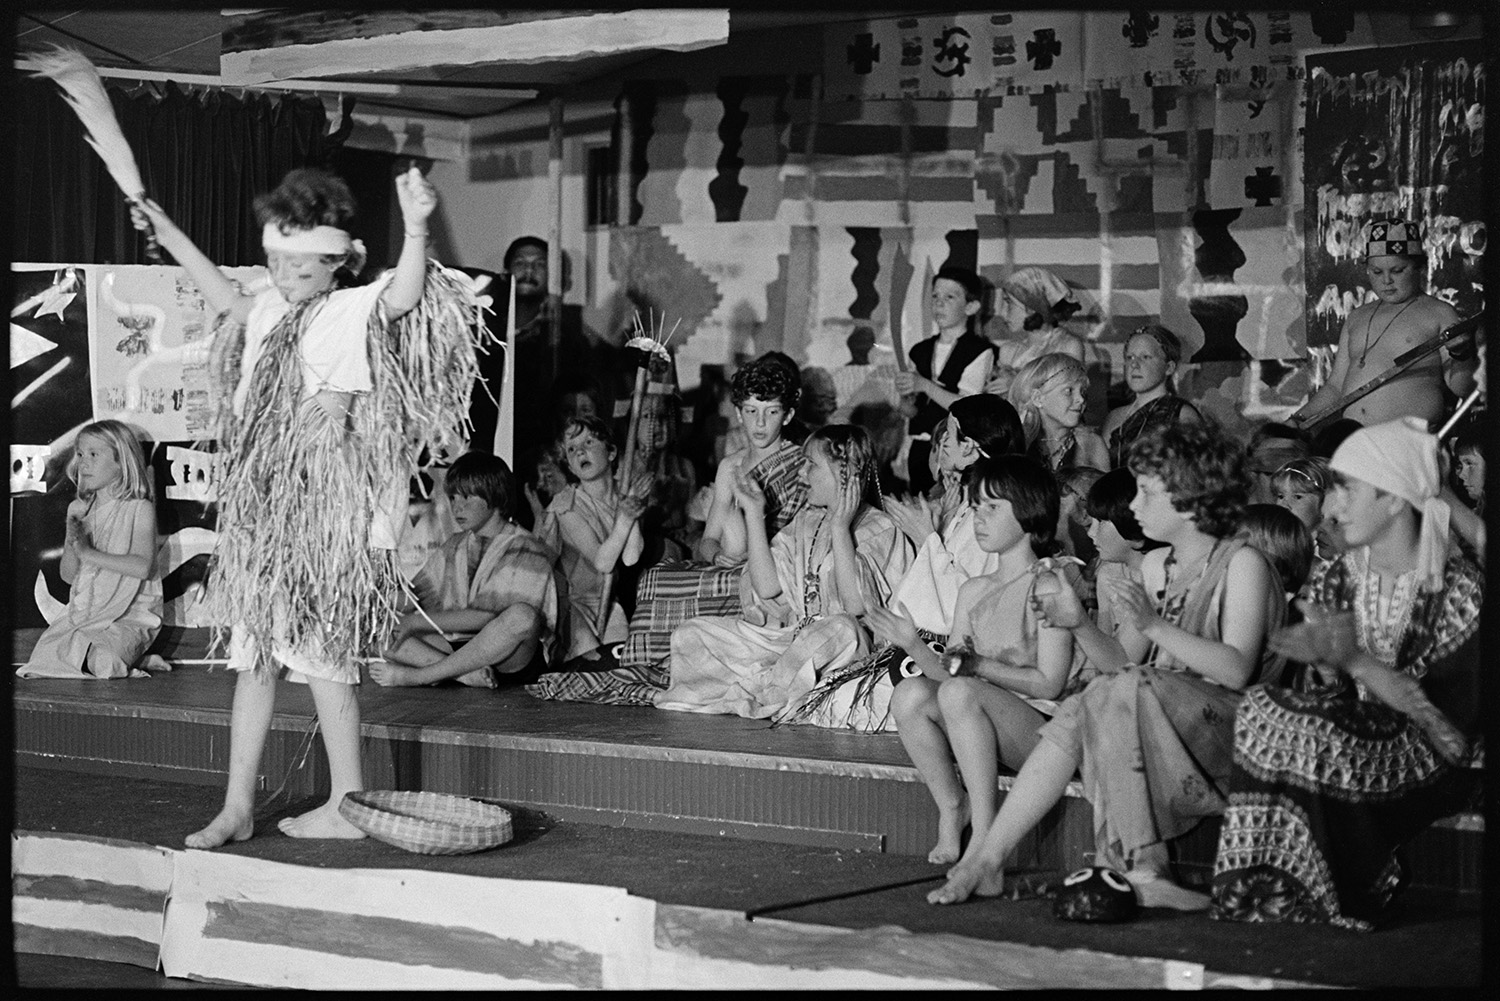 School performance produced by visiting group from Ghana. 
[School children performing a show on a stage in Dolton, possibly at the village hall or school, produced by a group from Ghana.]